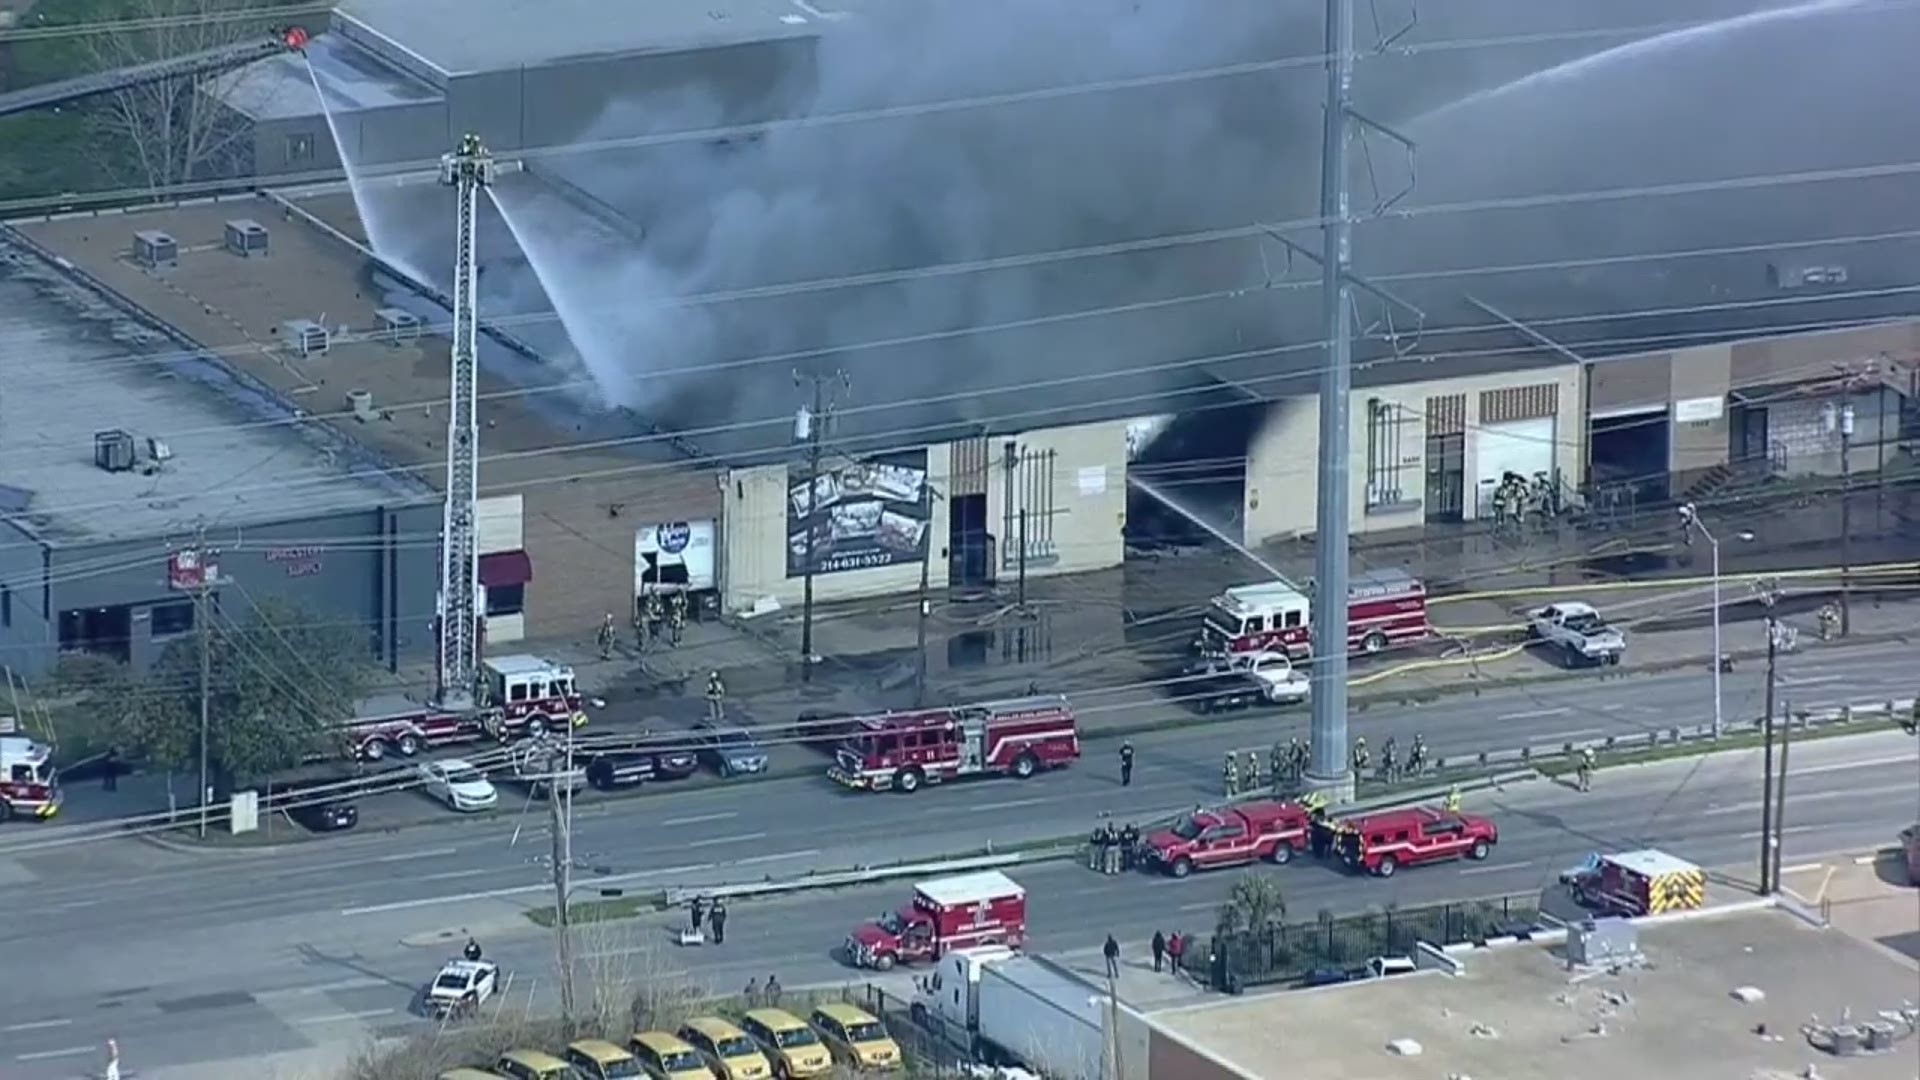 Dallas Fire-Rescue crews work to contain a fire at an upholstery warehouse near 2460 Irving Boulevard, officials say. The cause of the fire is under investigation.